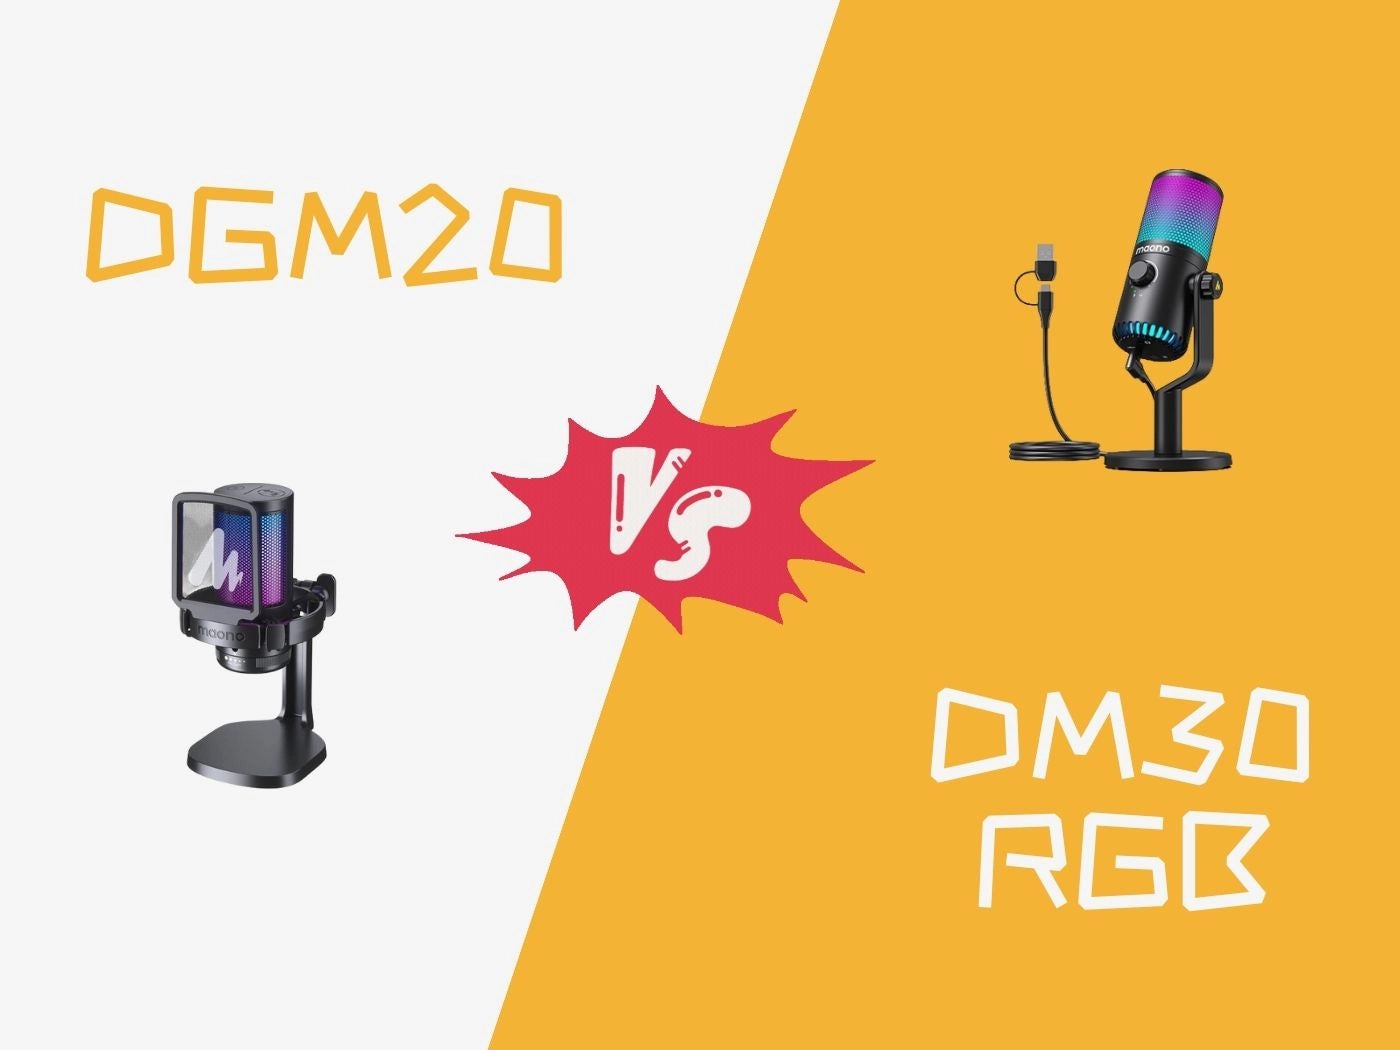 Which one is the better gaming mic: DGM20 VS DM30RGB?